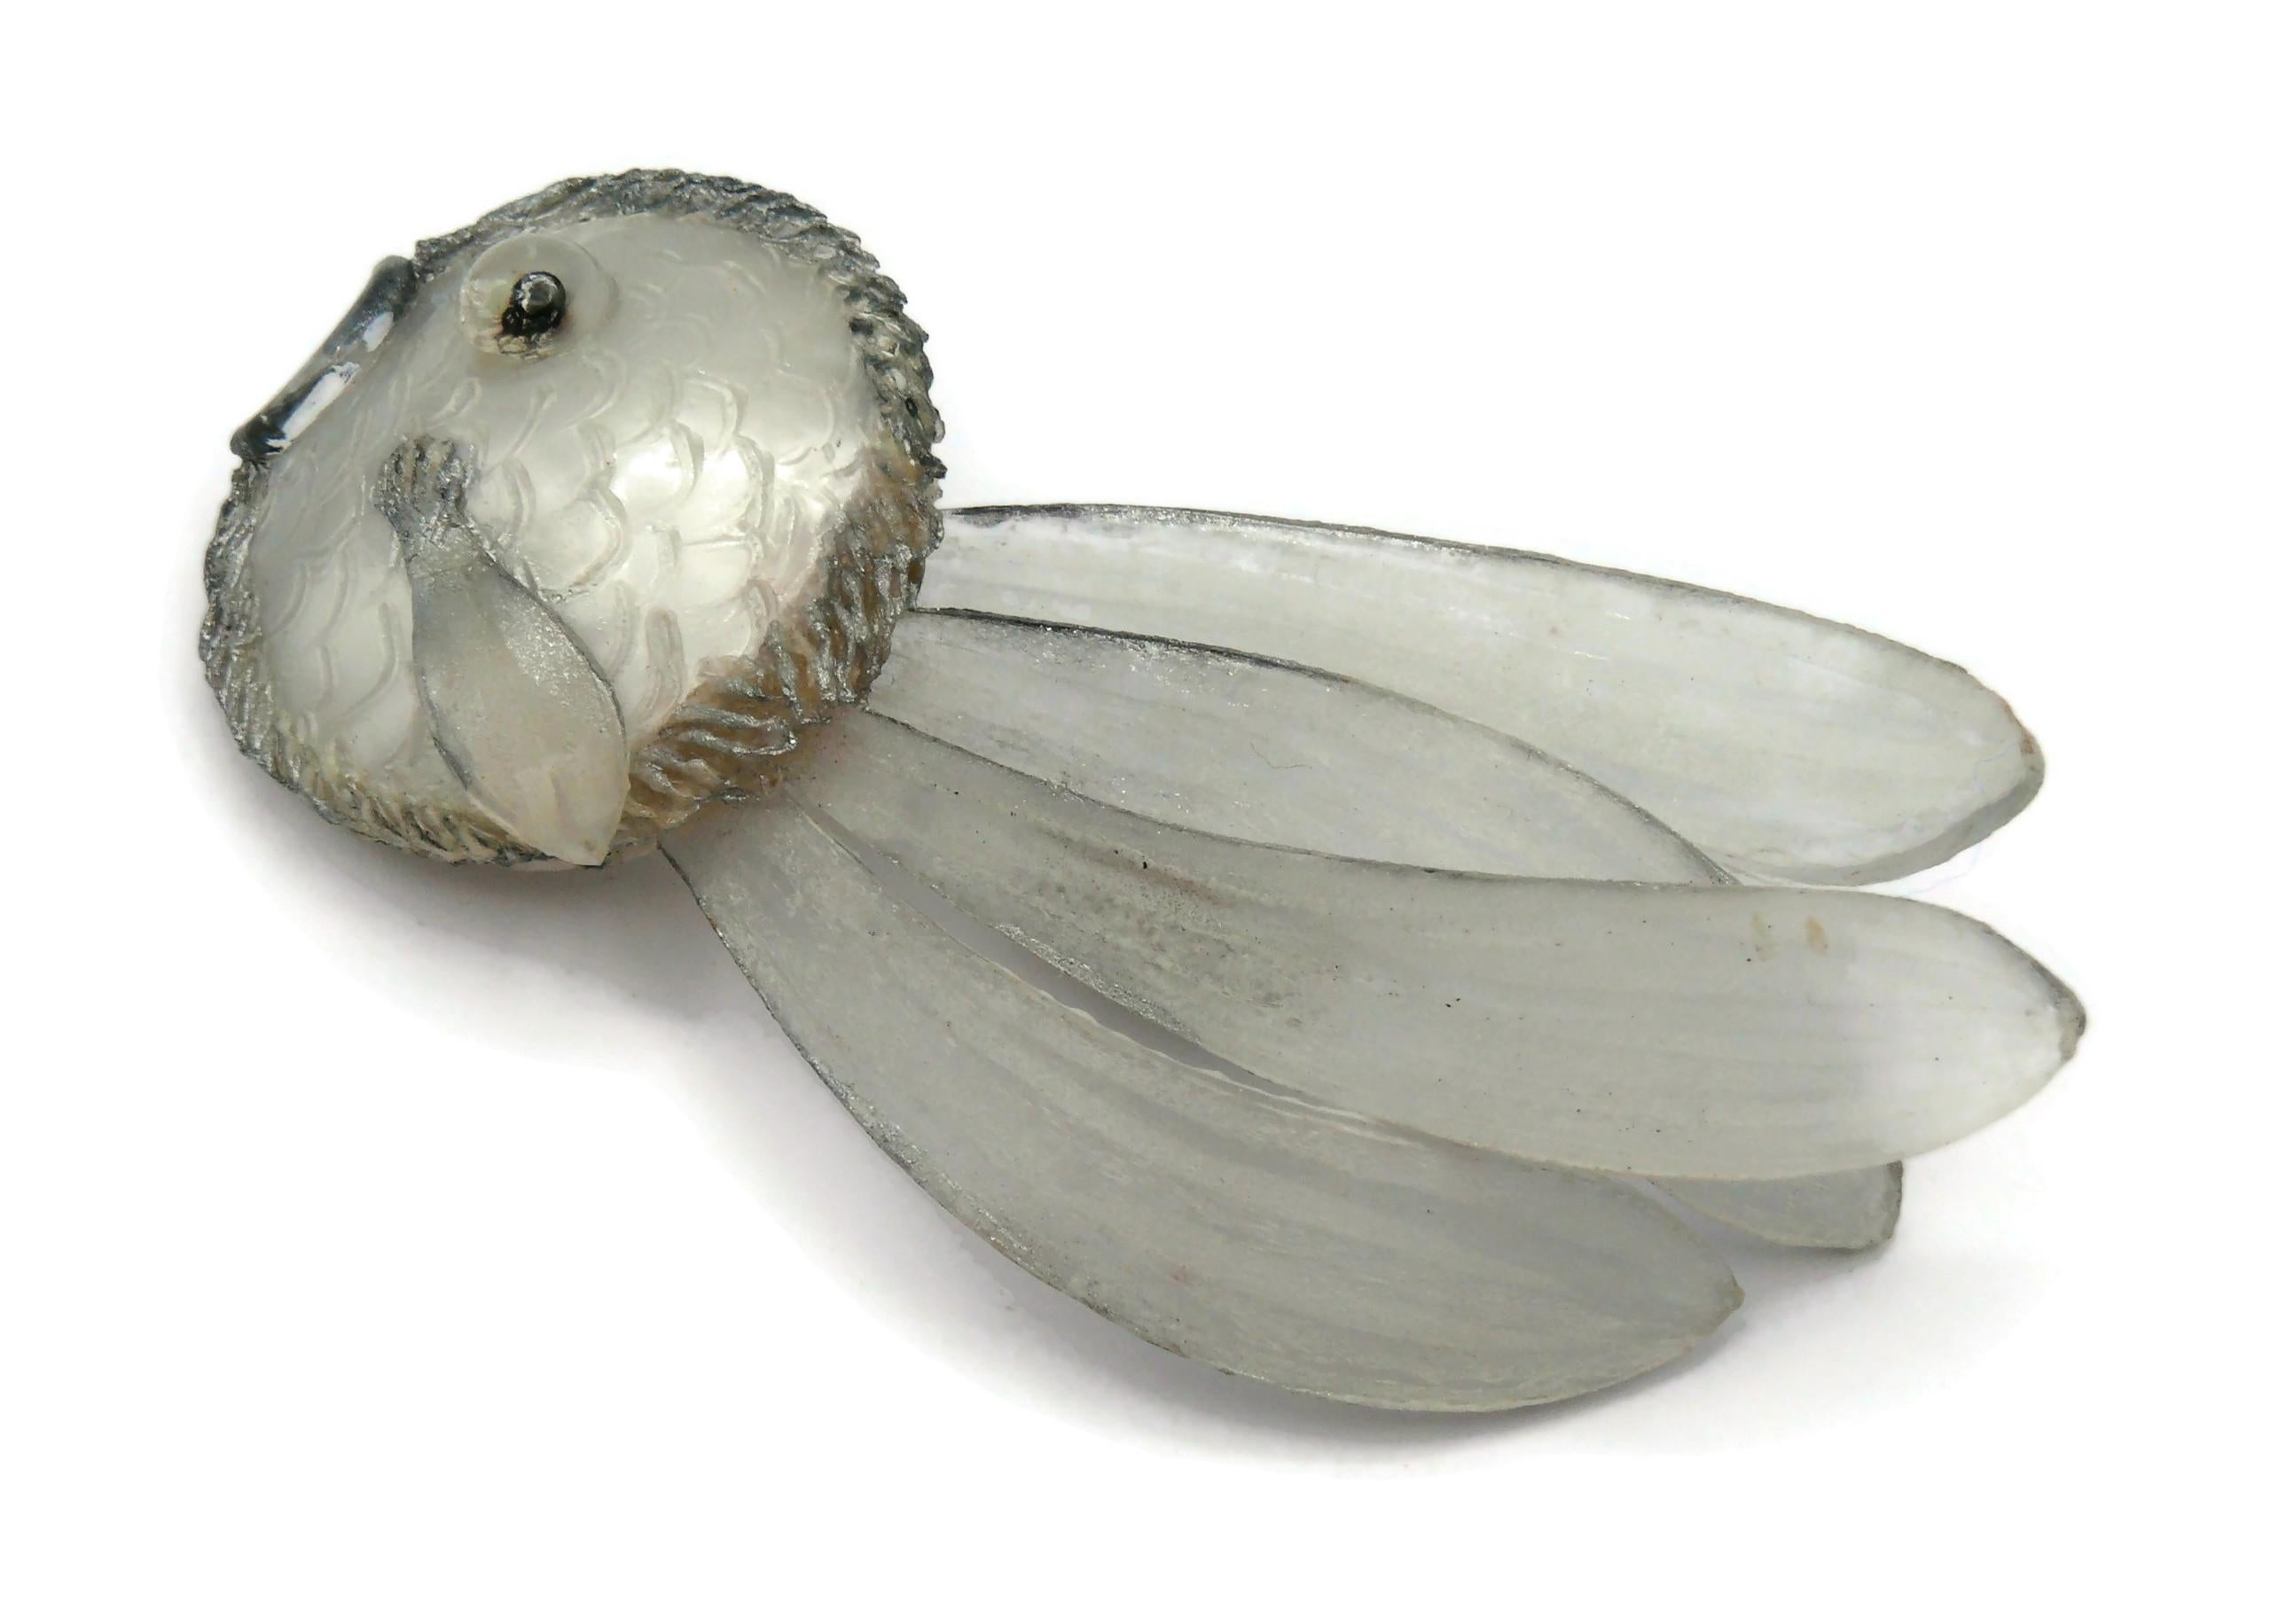 MONIQUE VEDIE (attributed to) Vintage Talosel Resin Fish Lapel Pin Brooch For Sale 1